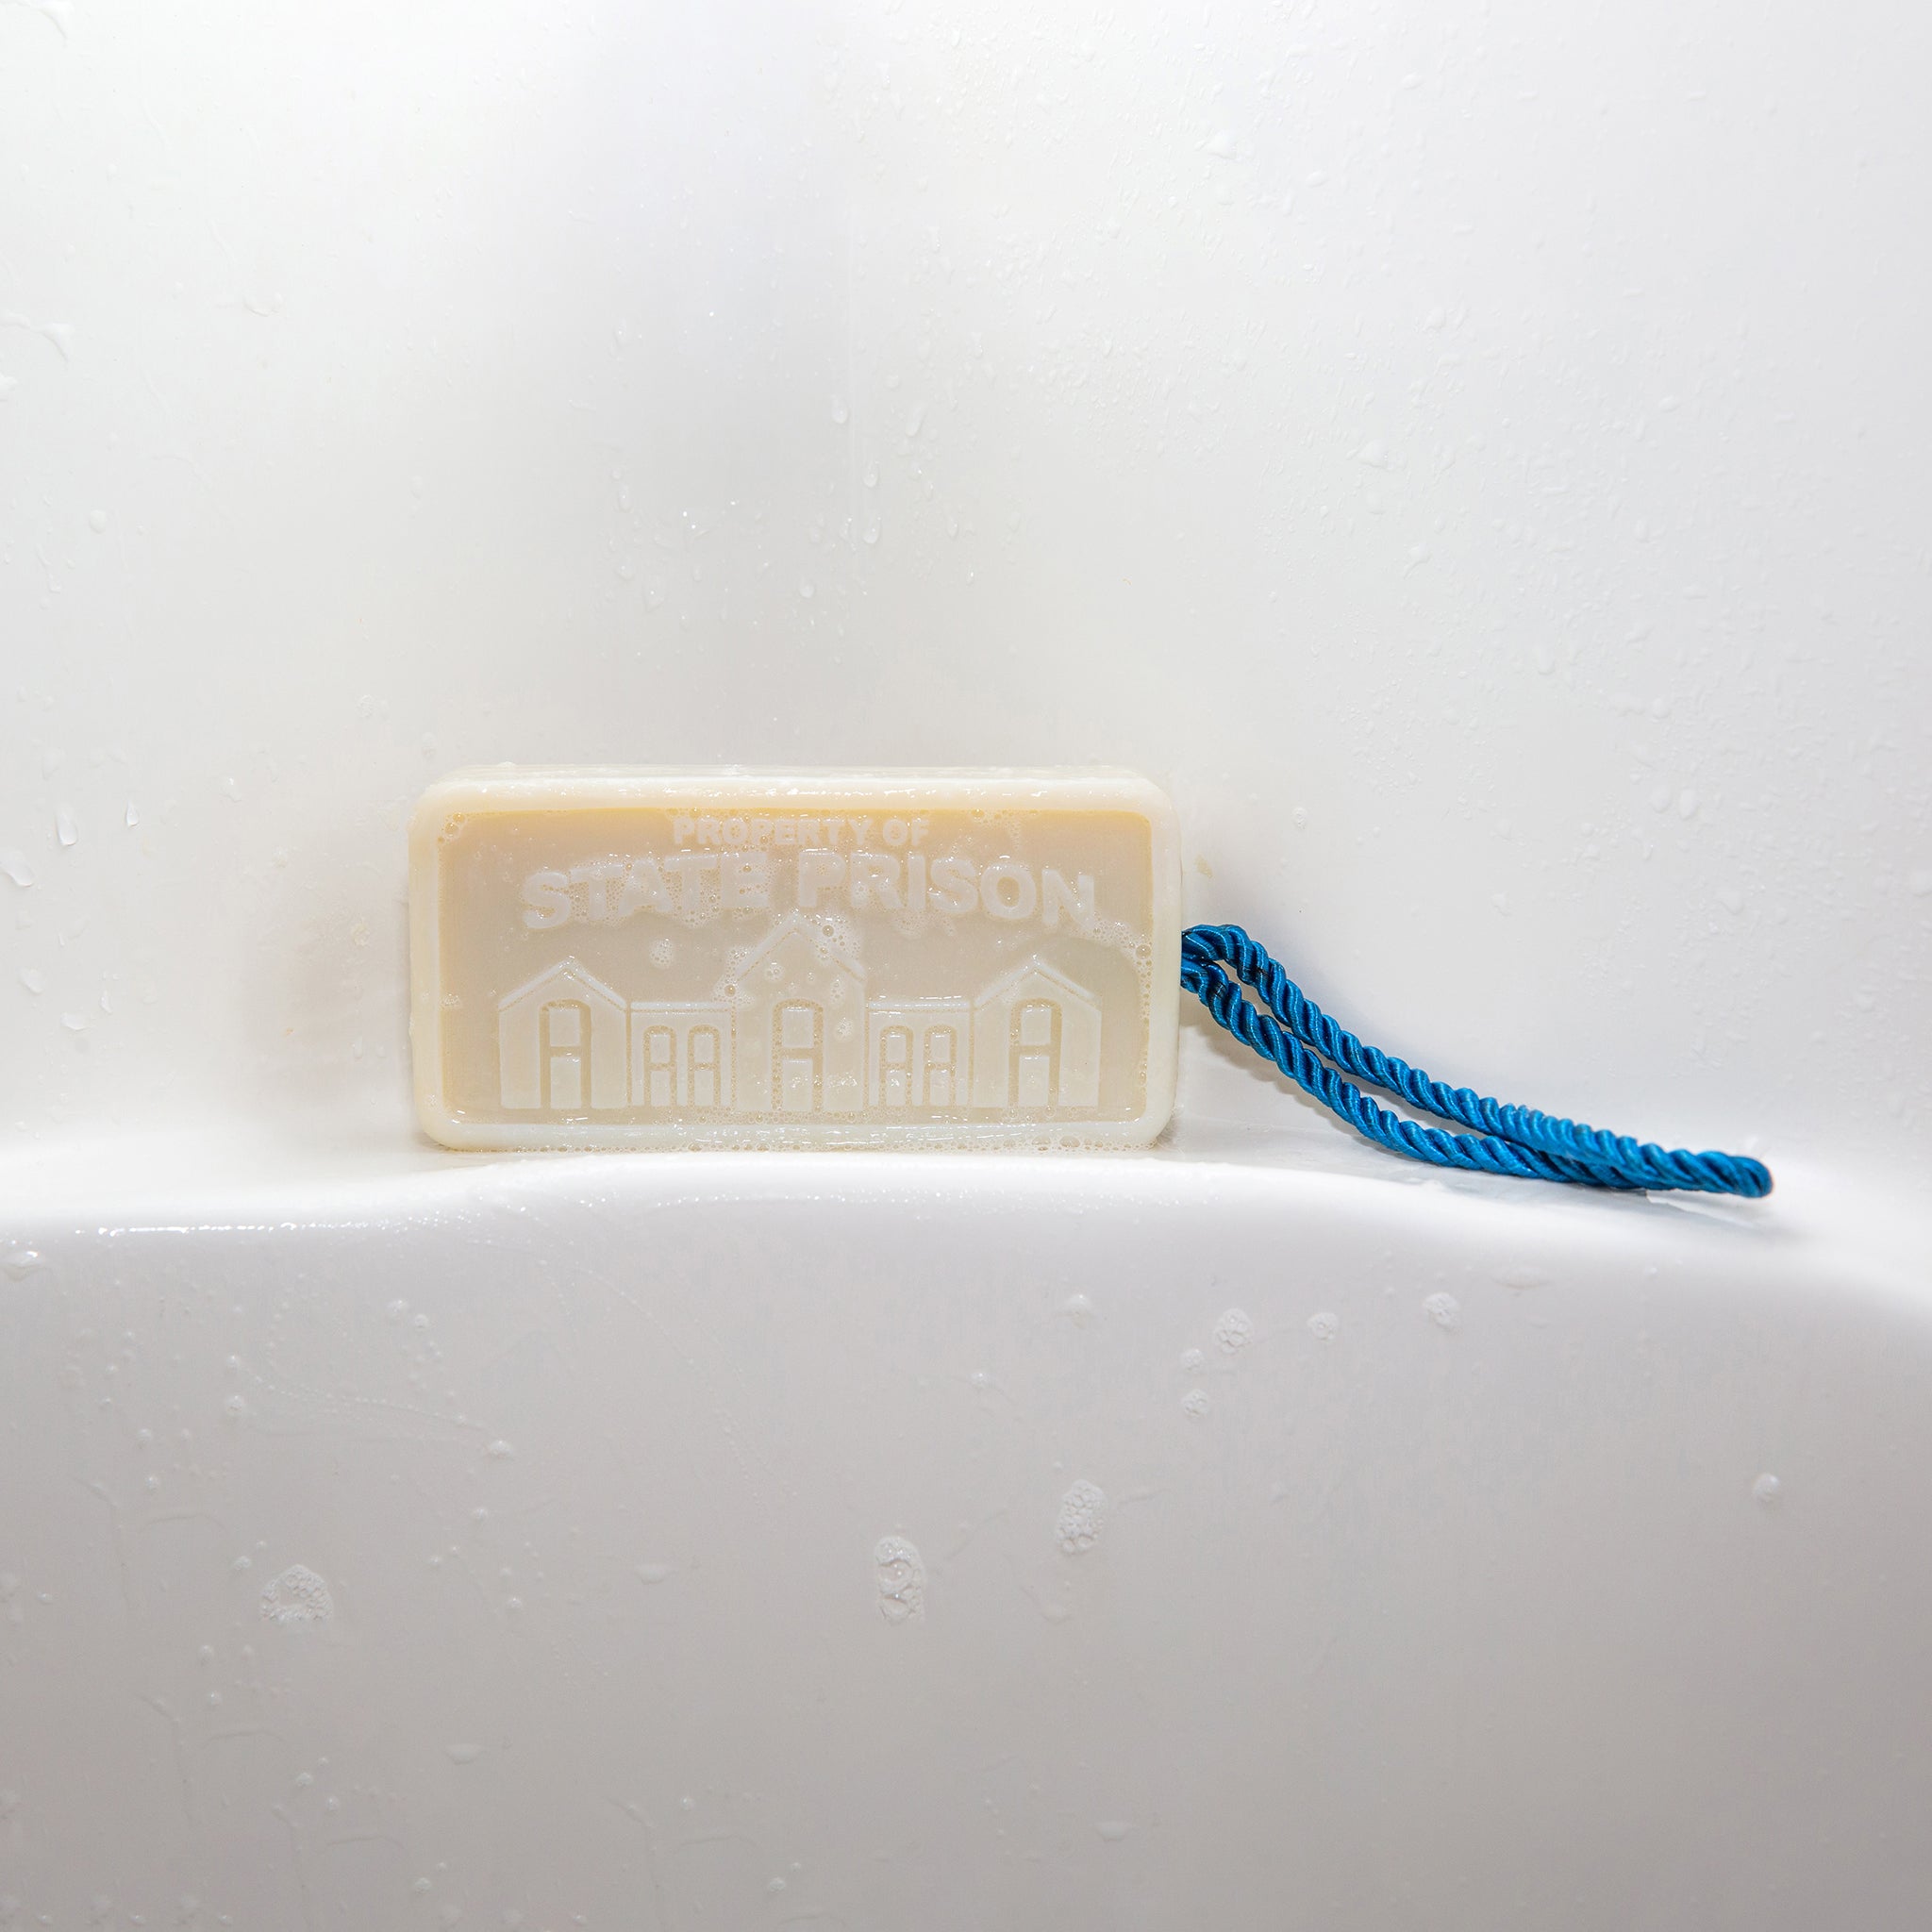 State Prision Soap on Rope